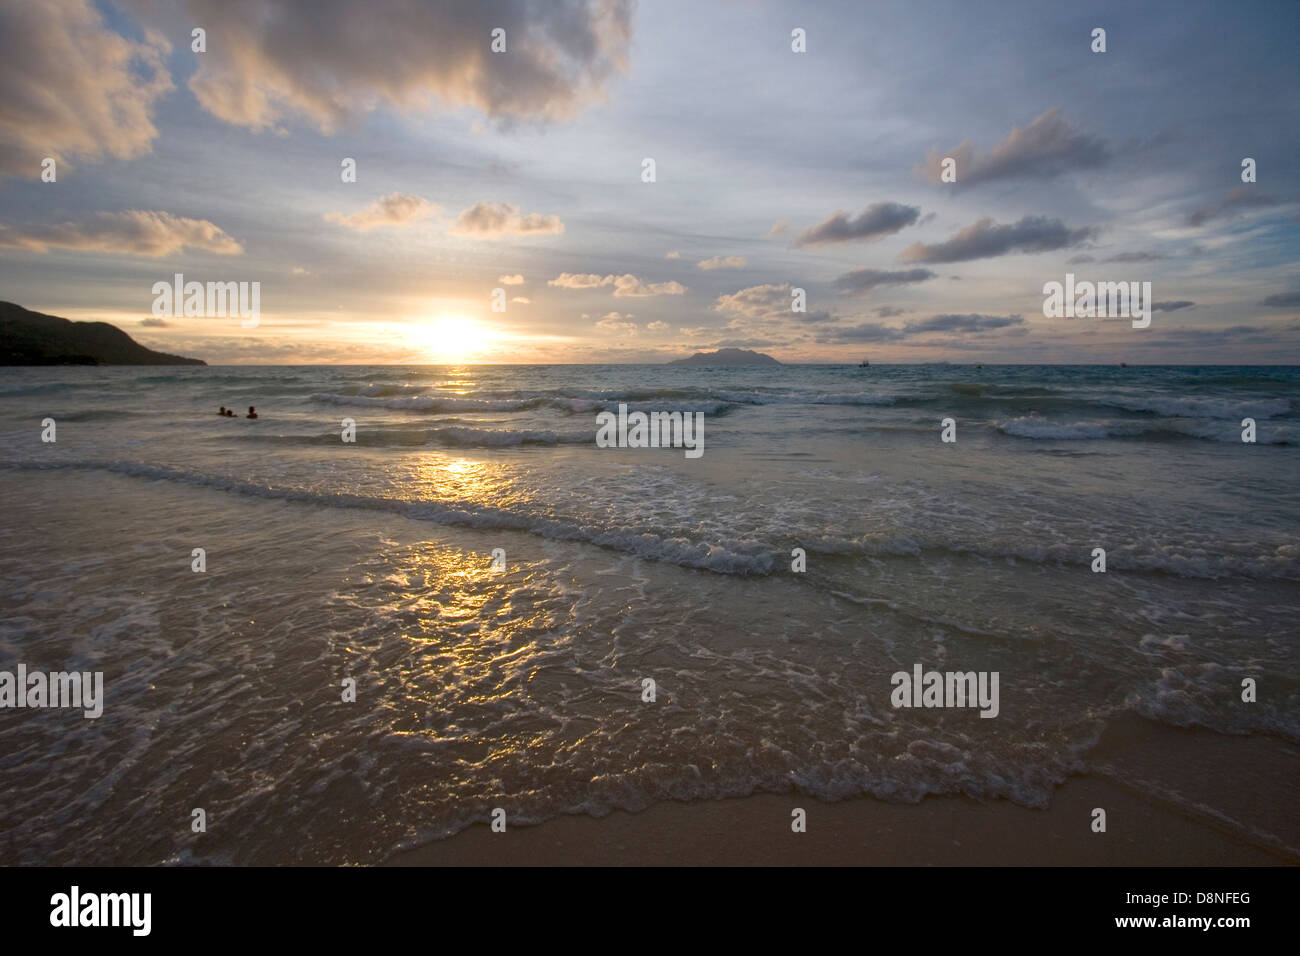 Sunset over a beach in the Seychelles. Stock Photo